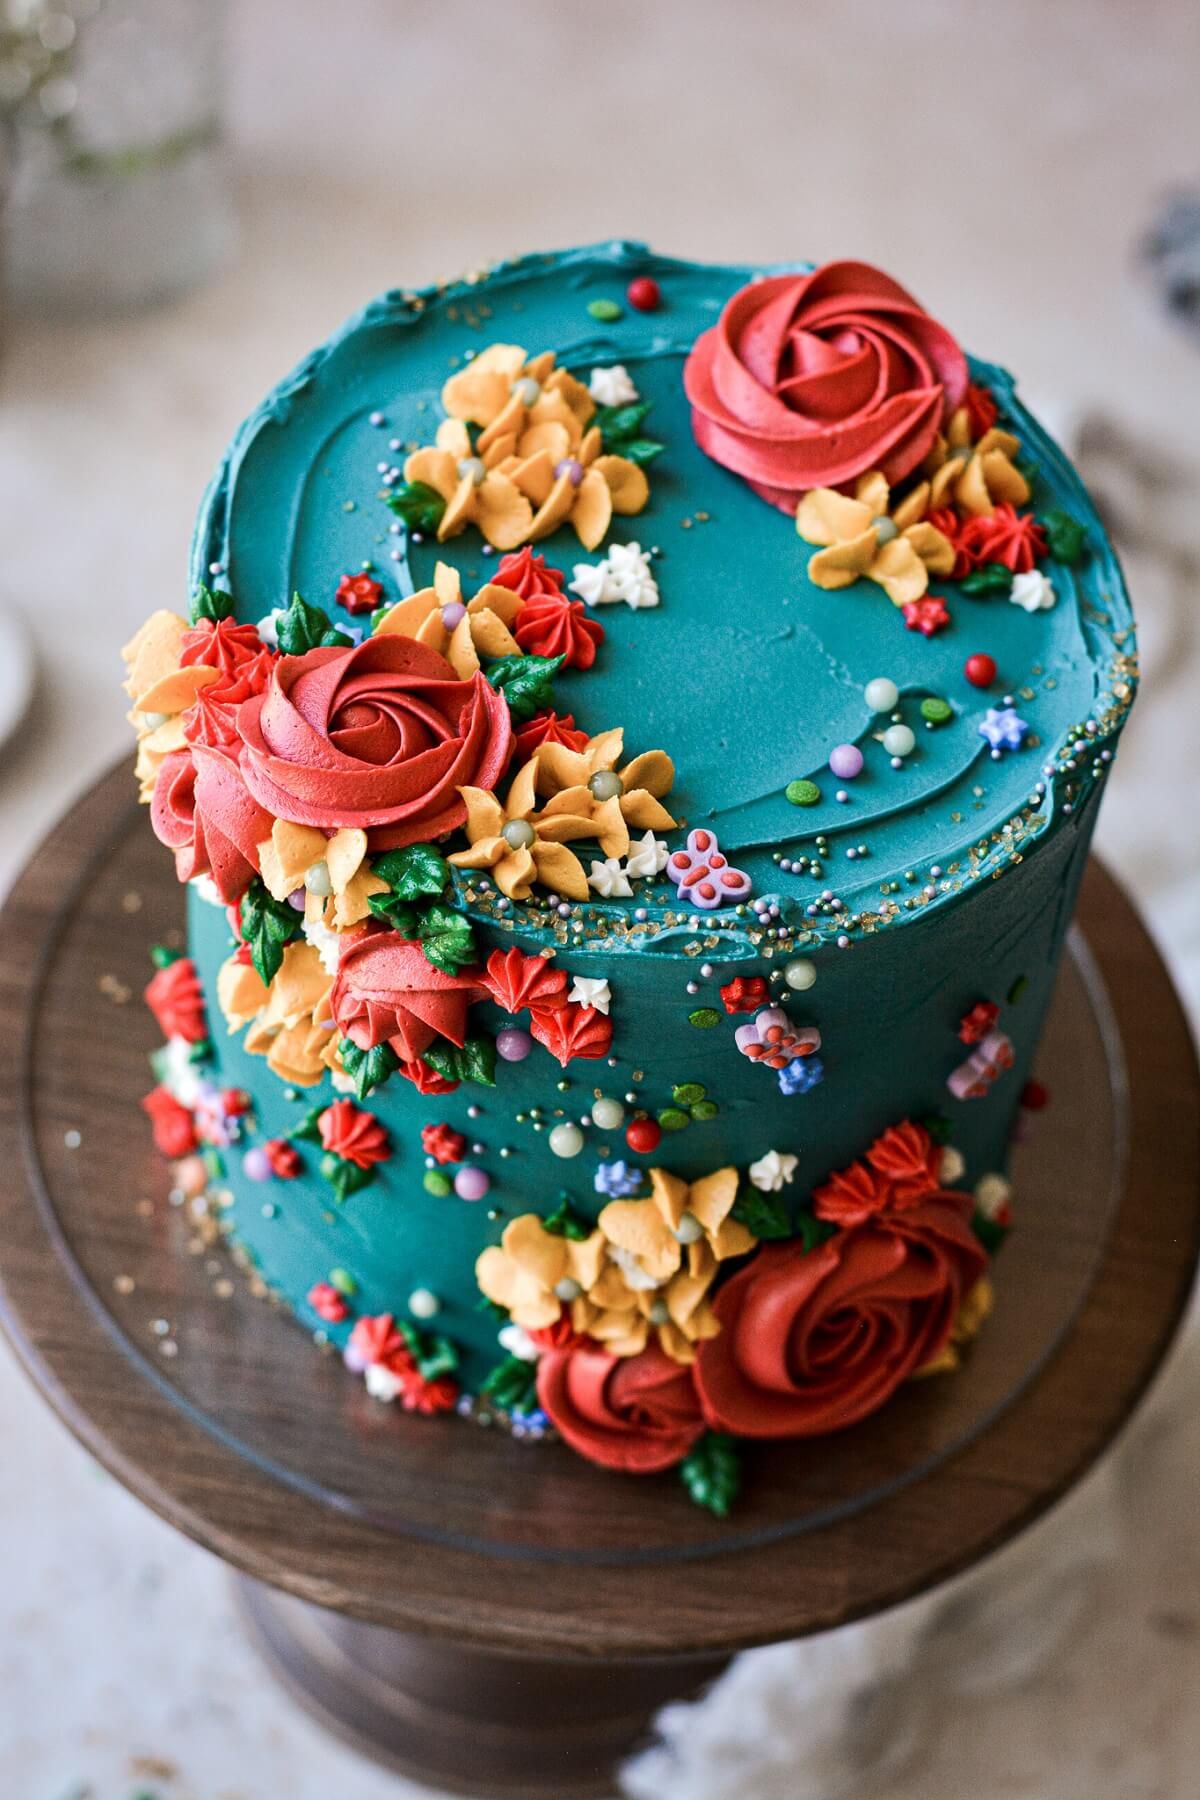 Turquoise Floral Cake with Piped Buttercream Flowers - Curly Girl Kitchen